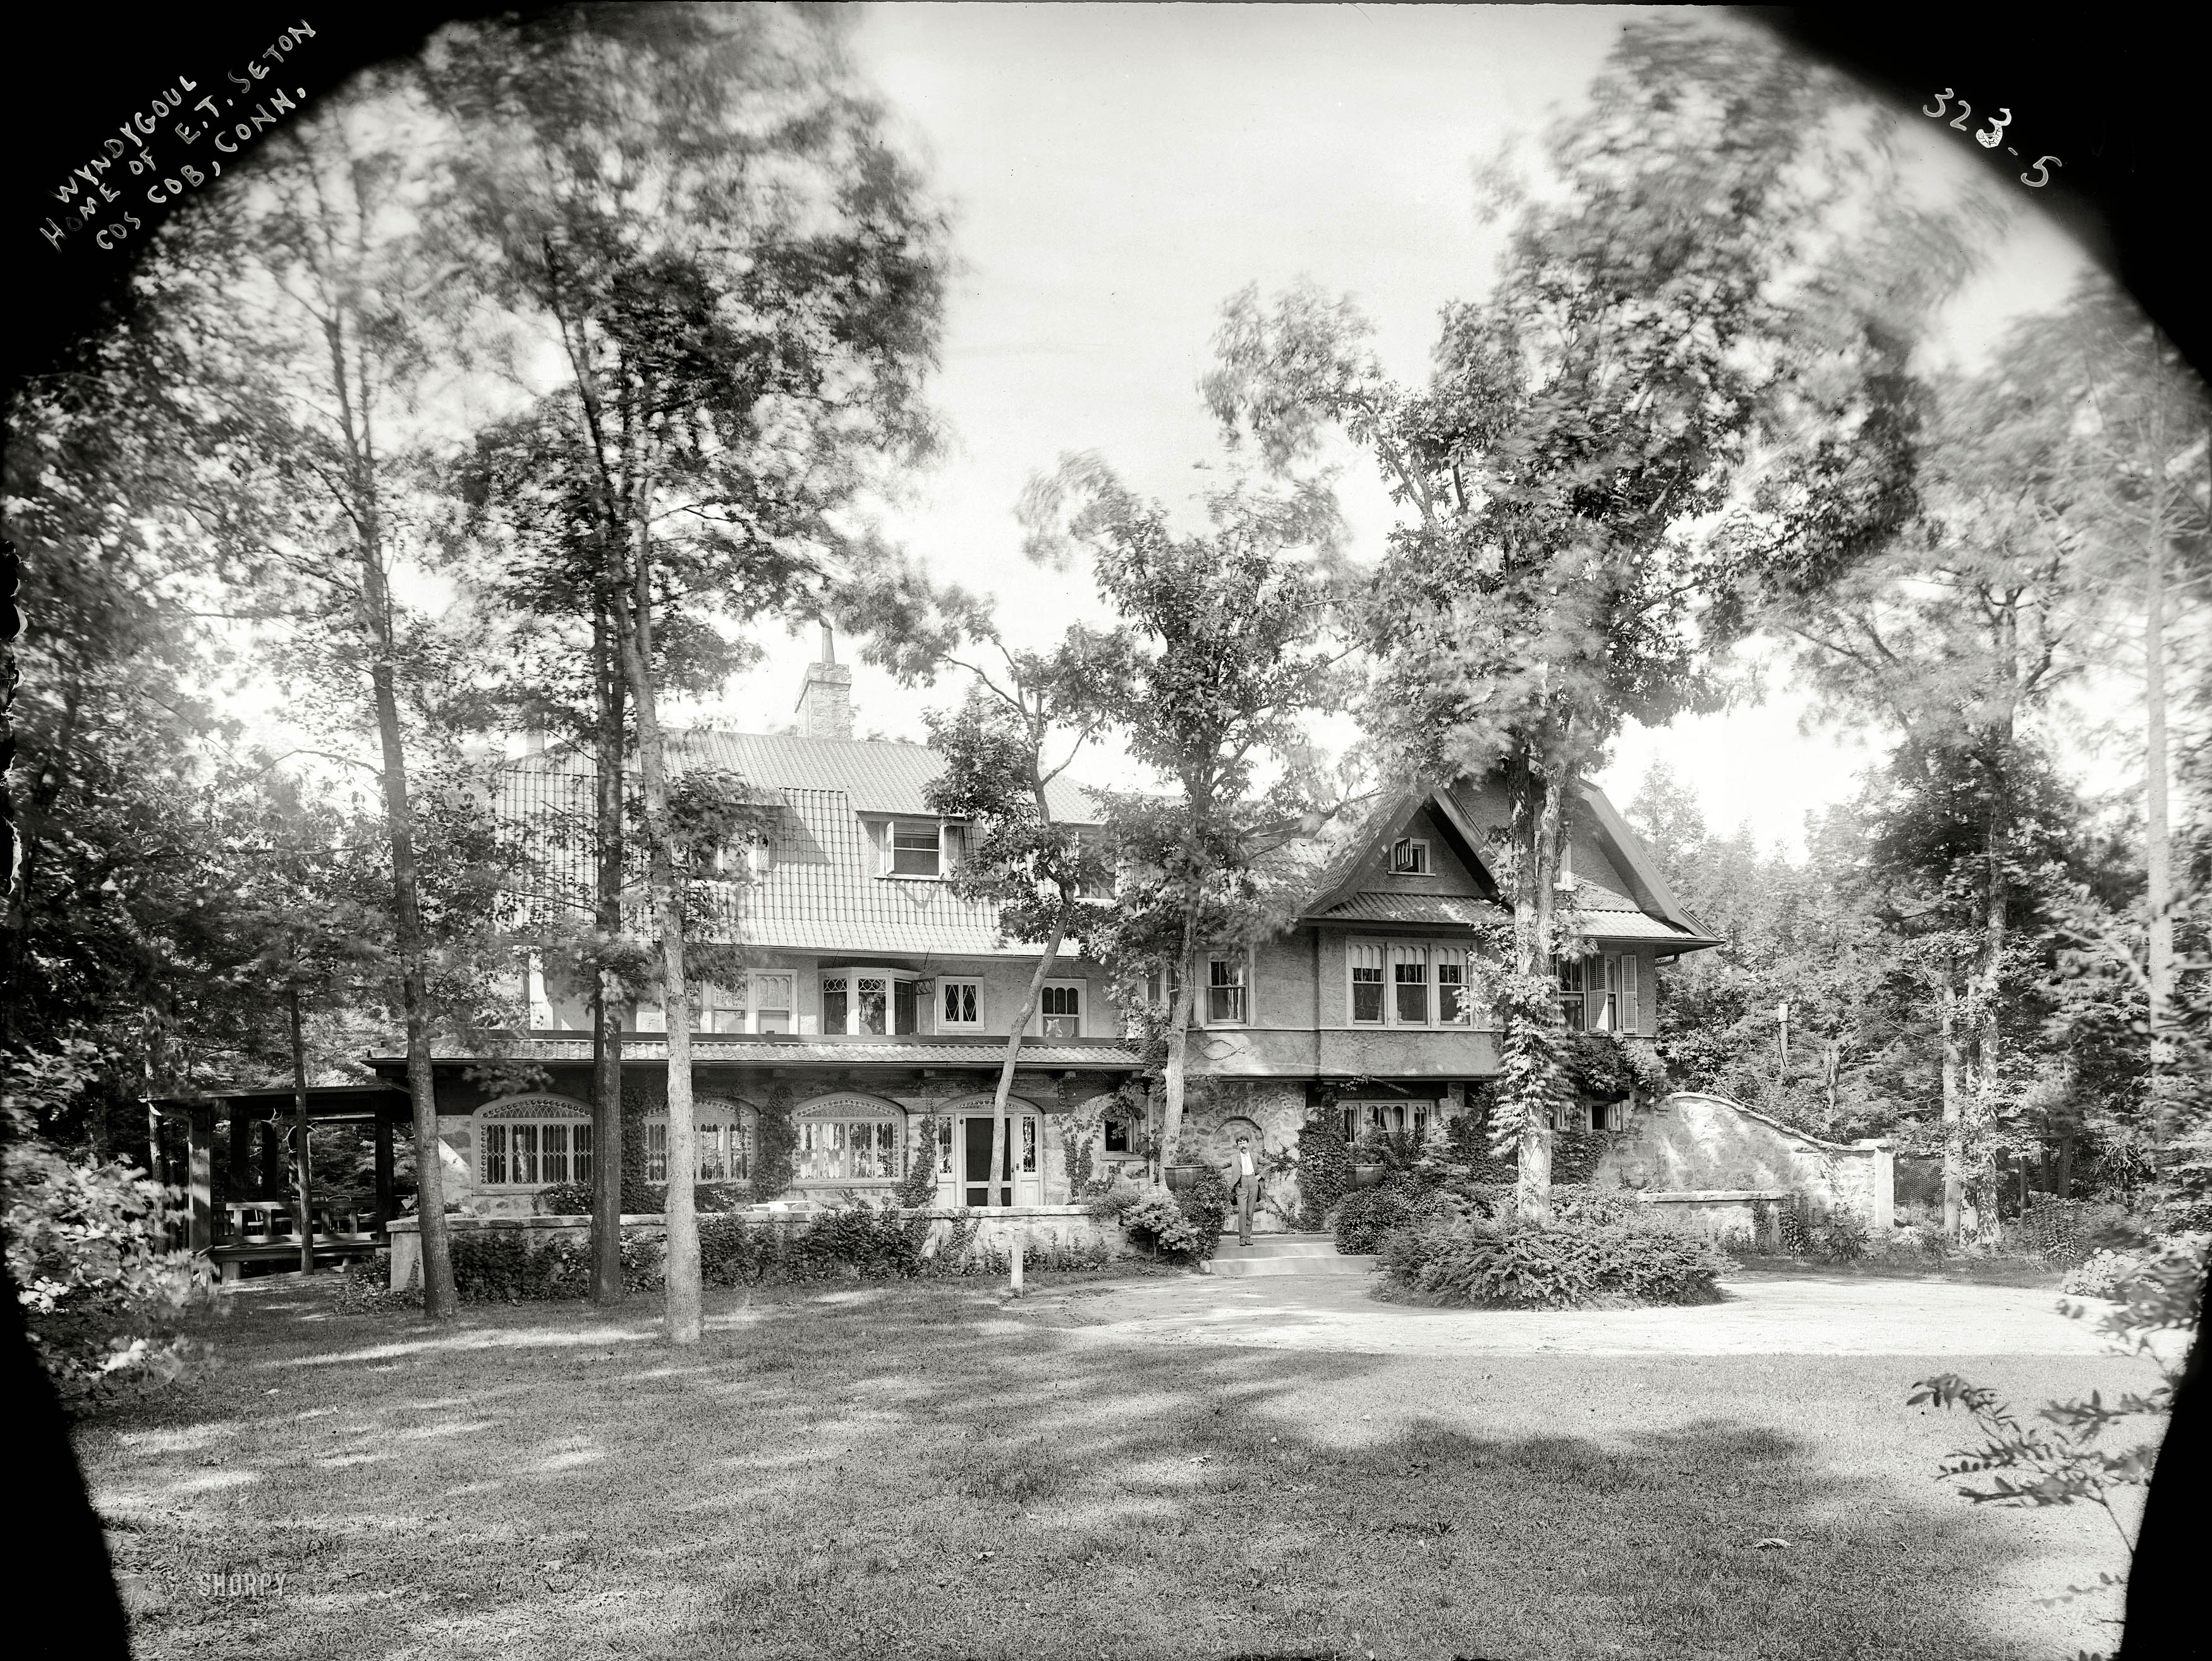 Circa 1908. "Wyndygoul, home of E.T. Seton." The writer-naturalist Ernest Thompson Seton, one of the founders of the Boy Scouts of America, at his Cos Cob, Connecticut, estate. 8x10 glass negative, Bain News Service. View full size.